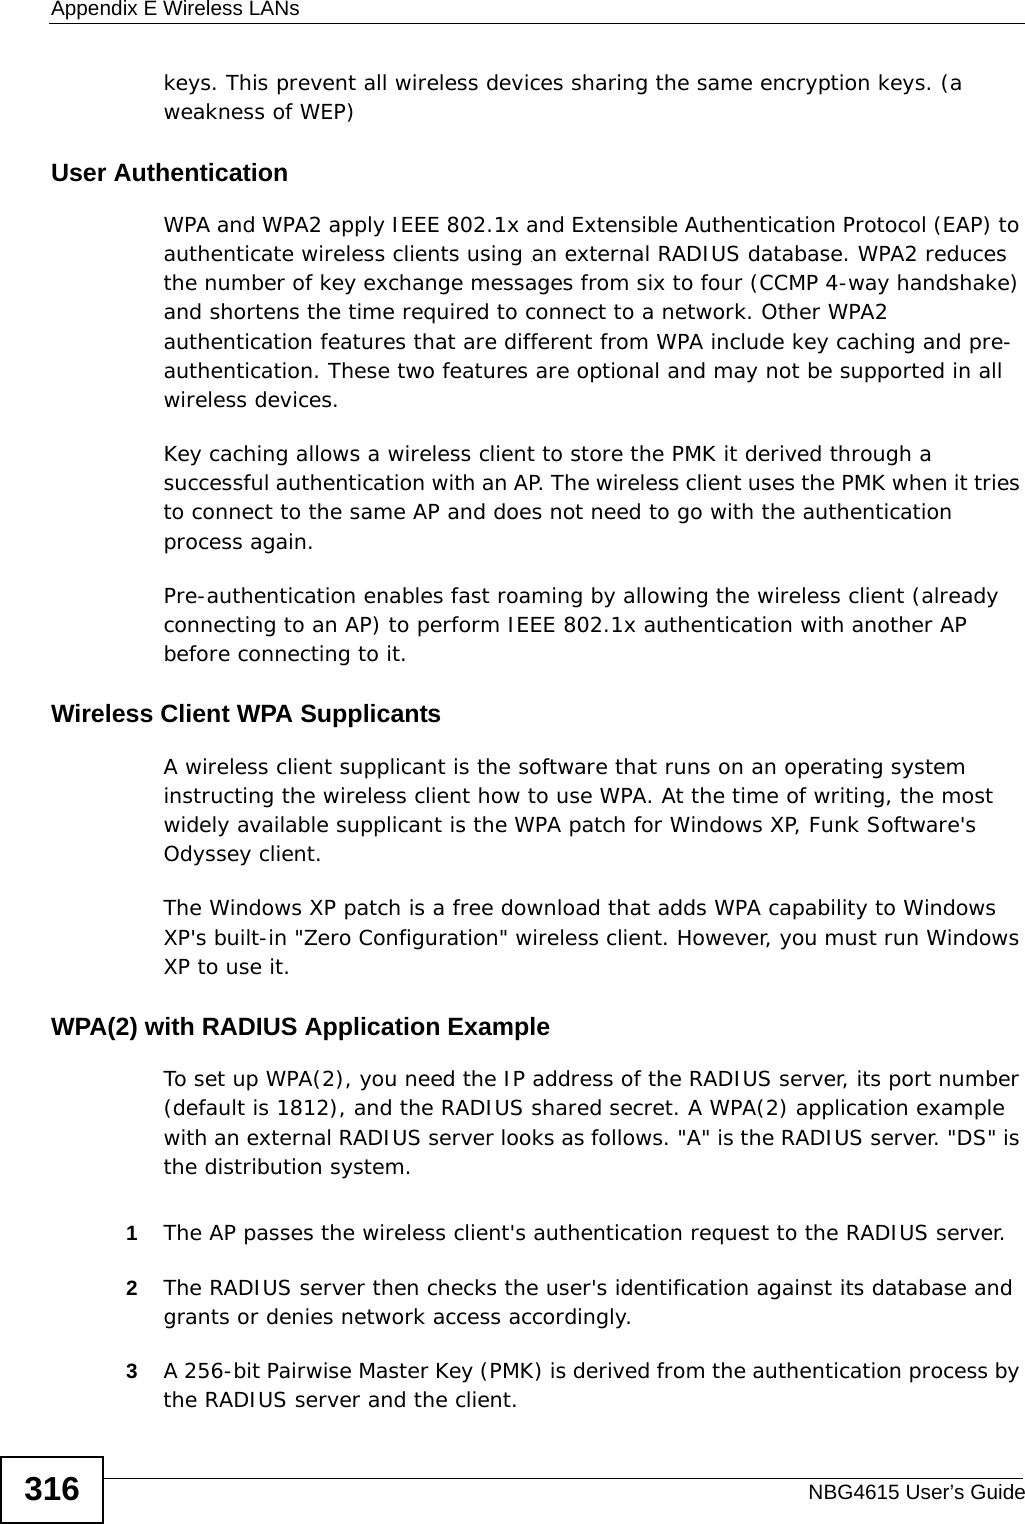 Appendix E Wireless LANsNBG4615 User’s Guide316keys. This prevent all wireless devices sharing the same encryption keys. (a weakness of WEP)User Authentication WPA and WPA2 apply IEEE 802.1x and Extensible Authentication Protocol (EAP) to authenticate wireless clients using an external RADIUS database. WPA2 reduces the number of key exchange messages from six to four (CCMP 4-way handshake) and shortens the time required to connect to a network. Other WPA2 authentication features that are different from WPA include key caching and pre-authentication. These two features are optional and may not be supported in all wireless devices.Key caching allows a wireless client to store the PMK it derived through a successful authentication with an AP. The wireless client uses the PMK when it tries to connect to the same AP and does not need to go with the authentication process again.Pre-authentication enables fast roaming by allowing the wireless client (already connecting to an AP) to perform IEEE 802.1x authentication with another AP before connecting to it.Wireless Client WPA SupplicantsA wireless client supplicant is the software that runs on an operating system instructing the wireless client how to use WPA. At the time of writing, the most widely available supplicant is the WPA patch for Windows XP, Funk Software&apos;s Odyssey client. The Windows XP patch is a free download that adds WPA capability to Windows XP&apos;s built-in &quot;Zero Configuration&quot; wireless client. However, you must run Windows XP to use it. WPA(2) with RADIUS Application ExampleTo set up WPA(2), you need the IP address of the RADIUS server, its port number (default is 1812), and the RADIUS shared secret. A WPA(2) application example with an external RADIUS server looks as follows. &quot;A&quot; is the RADIUS server. &quot;DS&quot; is the distribution system.1The AP passes the wireless client&apos;s authentication request to the RADIUS server.2The RADIUS server then checks the user&apos;s identification against its database and grants or denies network access accordingly.3A 256-bit Pairwise Master Key (PMK) is derived from the authentication process by the RADIUS server and the client.